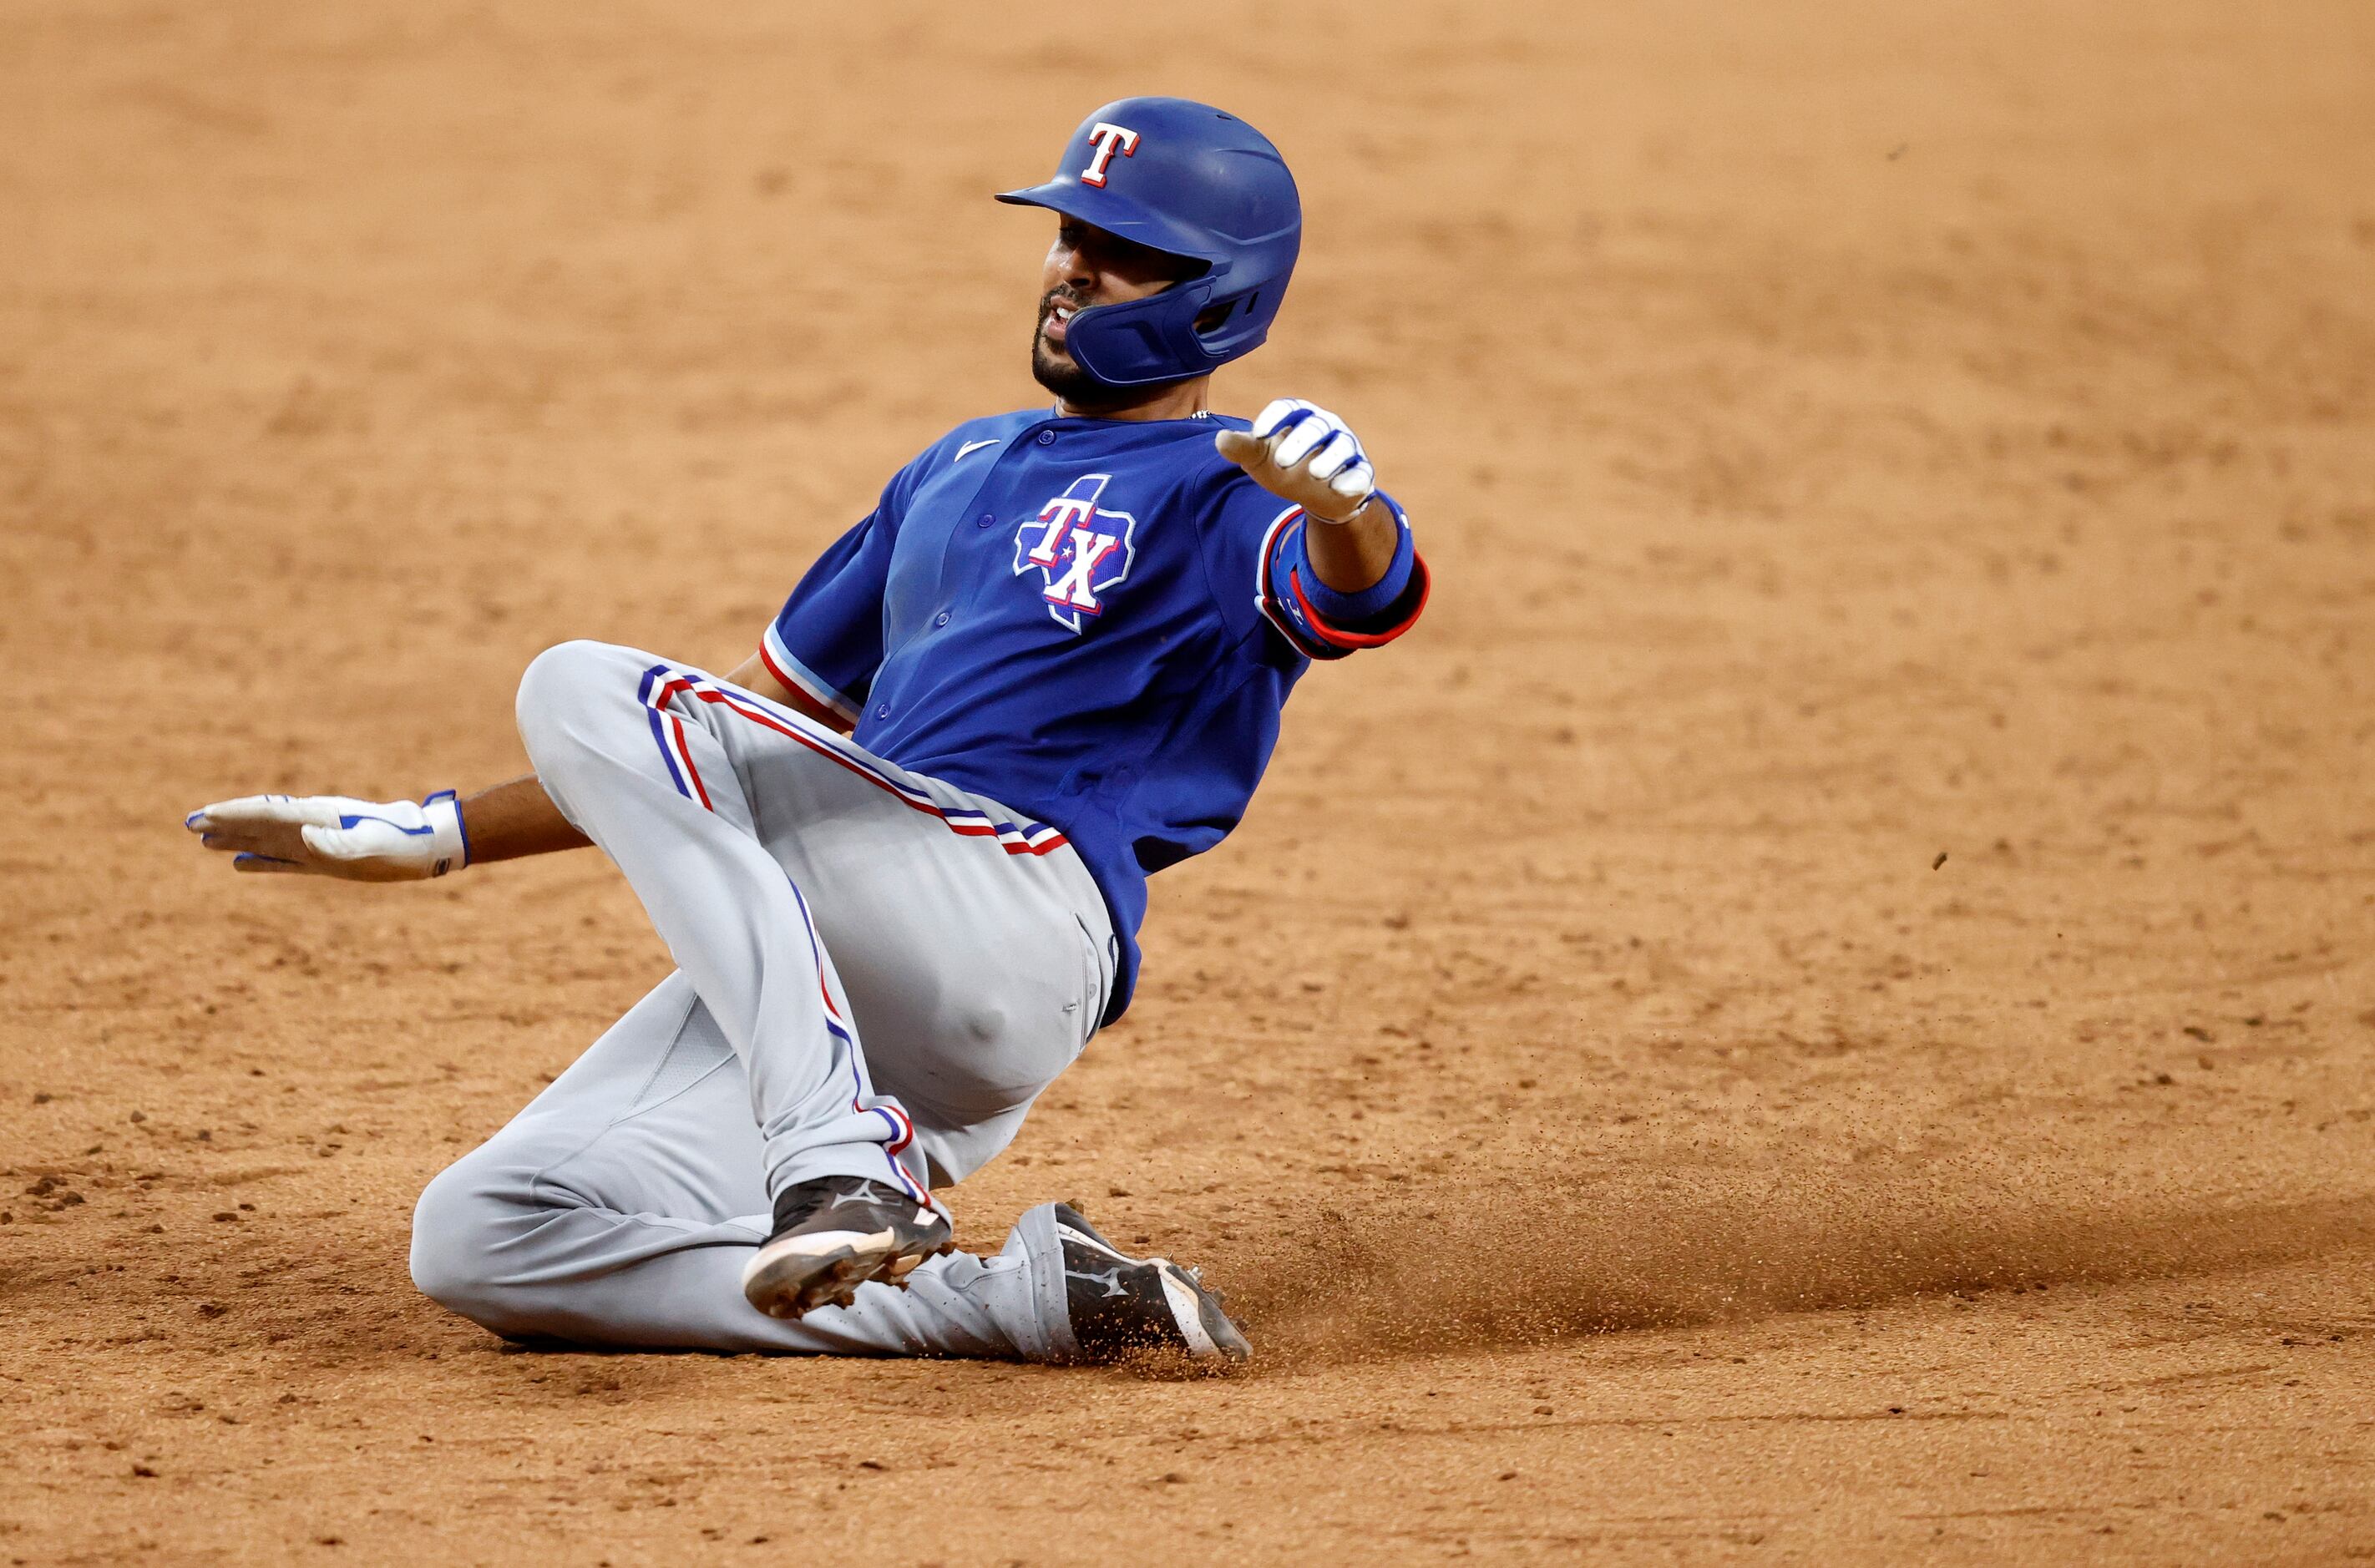 Texas Rangers Yadiel Rivera slides into third base for a triple during an intrasquad Summer...